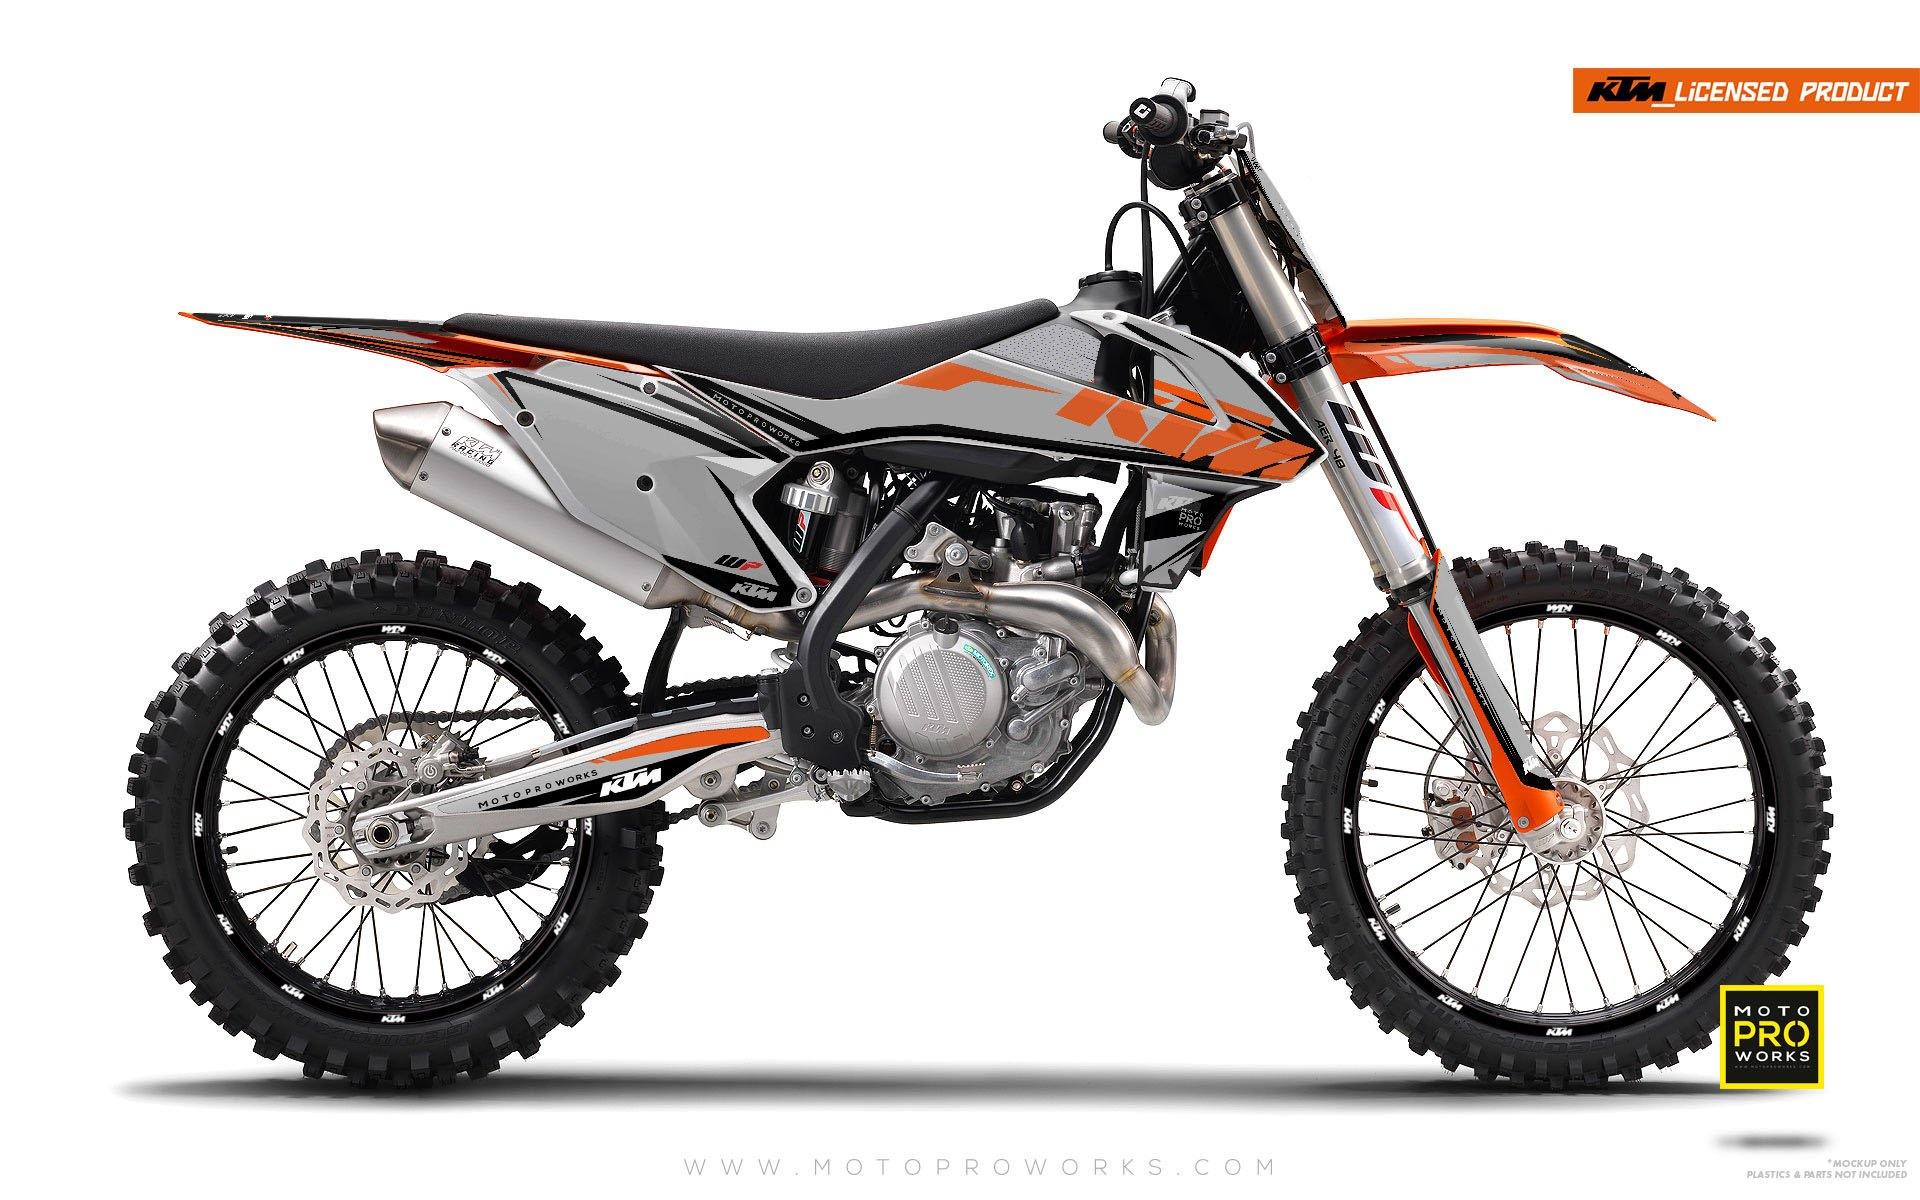 KTM GRAPHIC KIT - "EDGE" (grey) - MotoProWorks | Decals and Bike Graphic kit